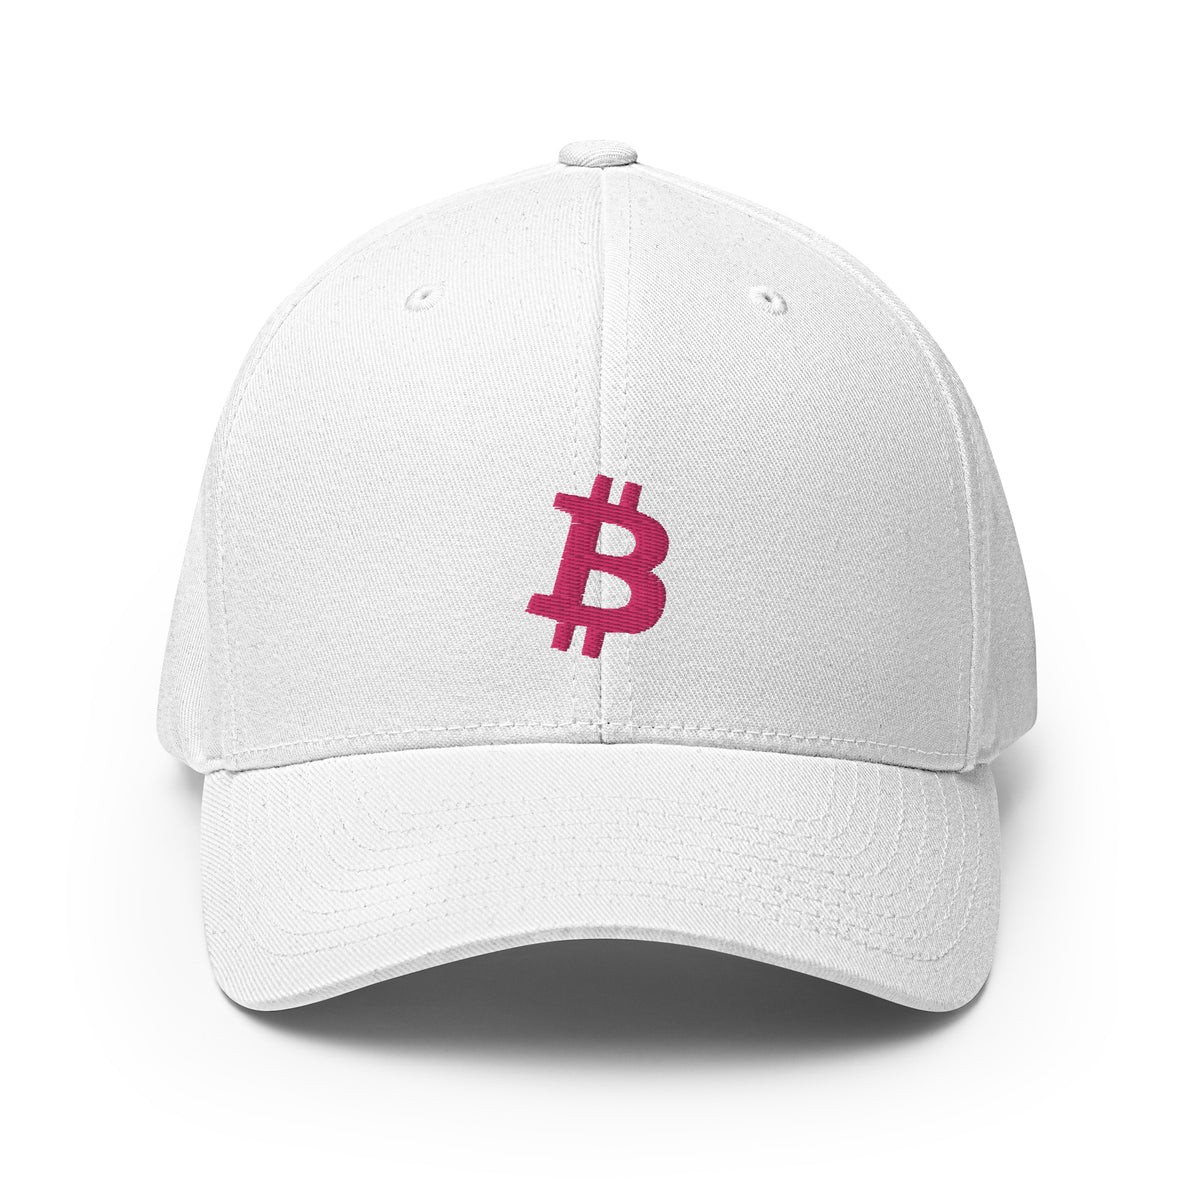 Bitcoin B (Pink Embroidery) Flexfit Hat - fomo21